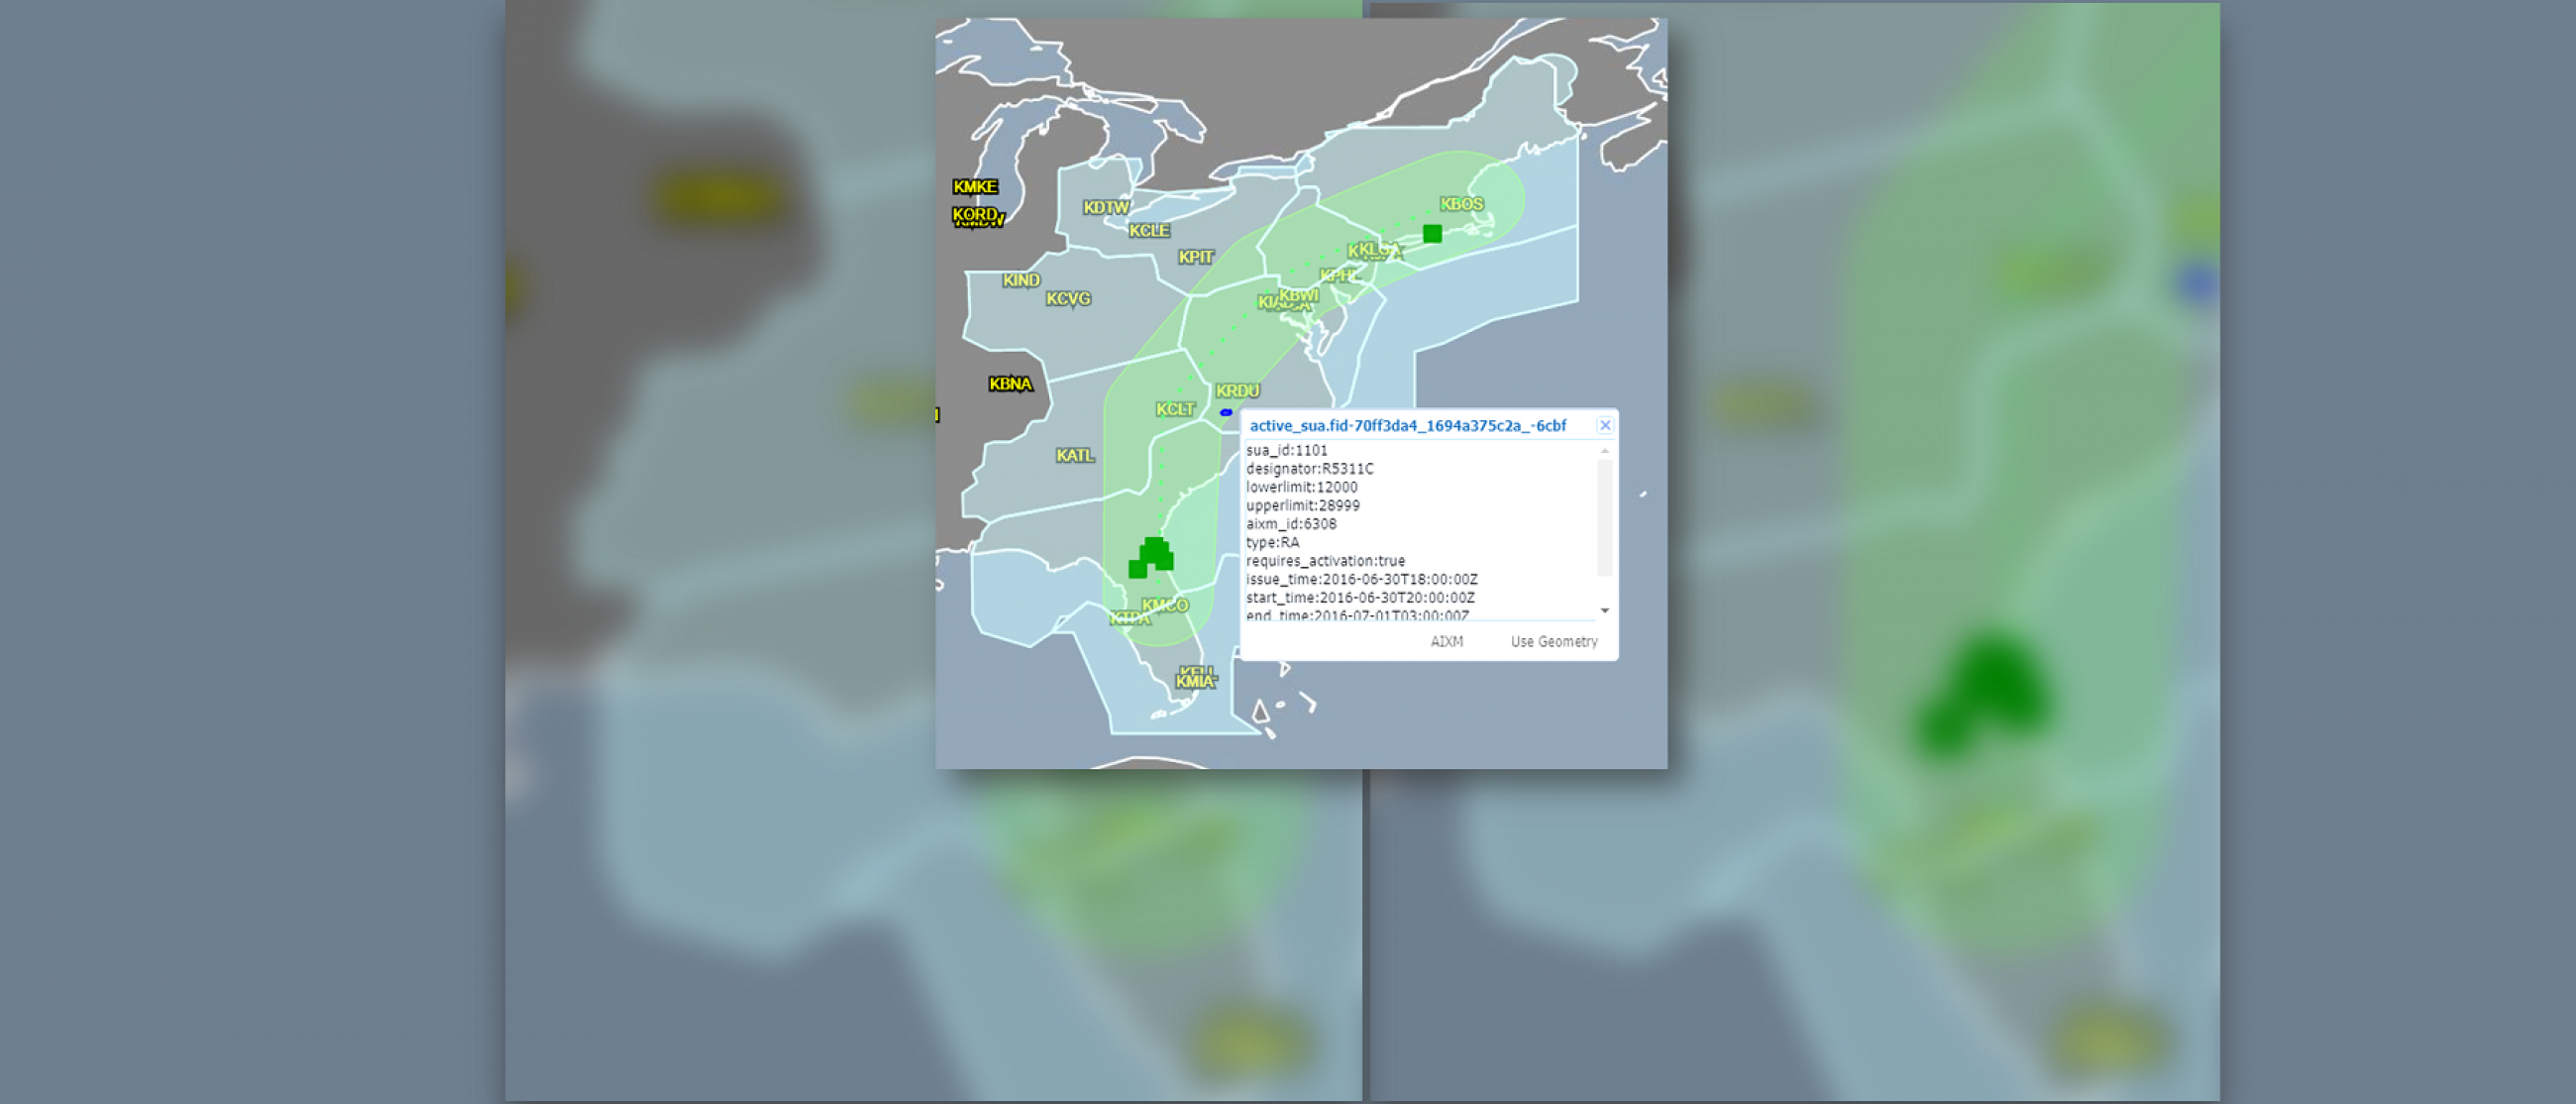 Screenshot of the NAS Common Reference interface showing data overlaid on a map of the U.S. East Coast.